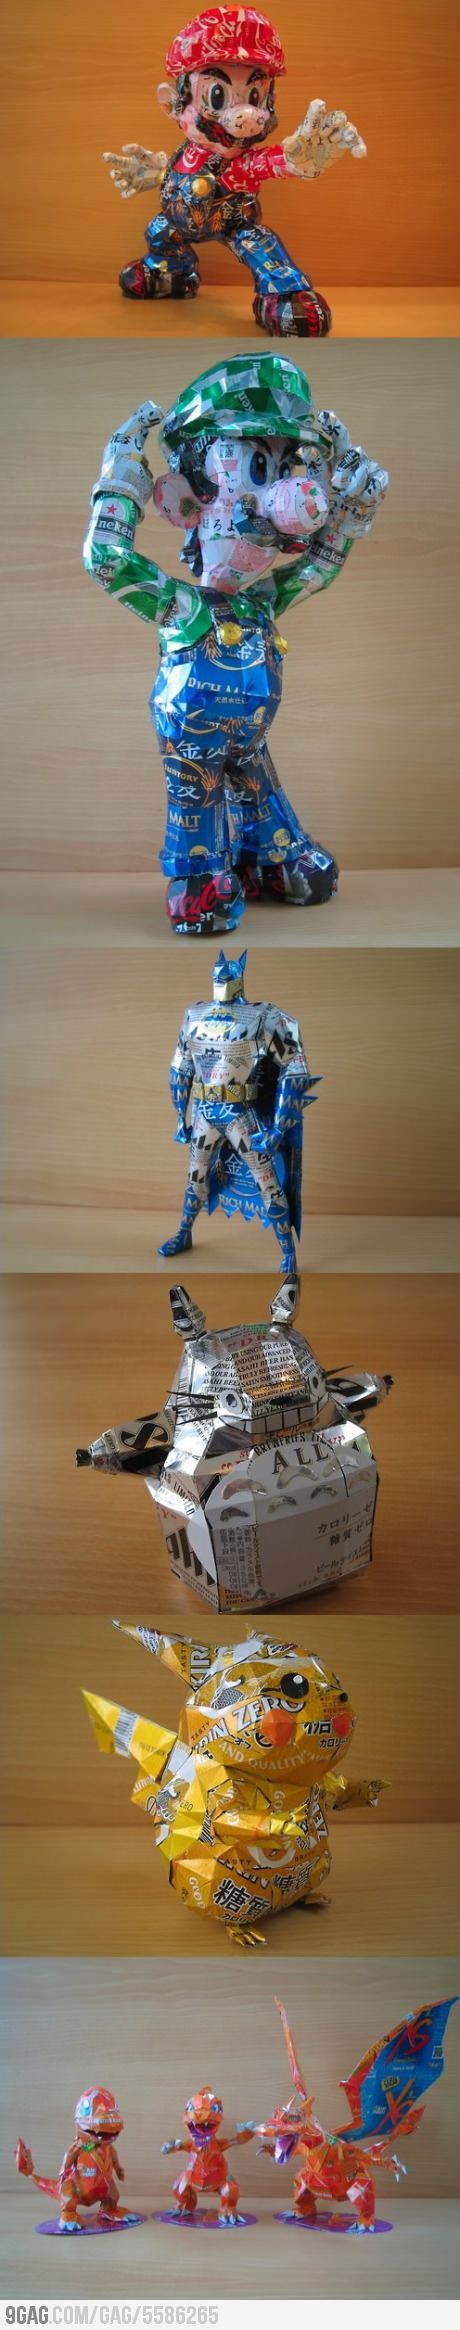 Awesome characters made out of aluminum cans